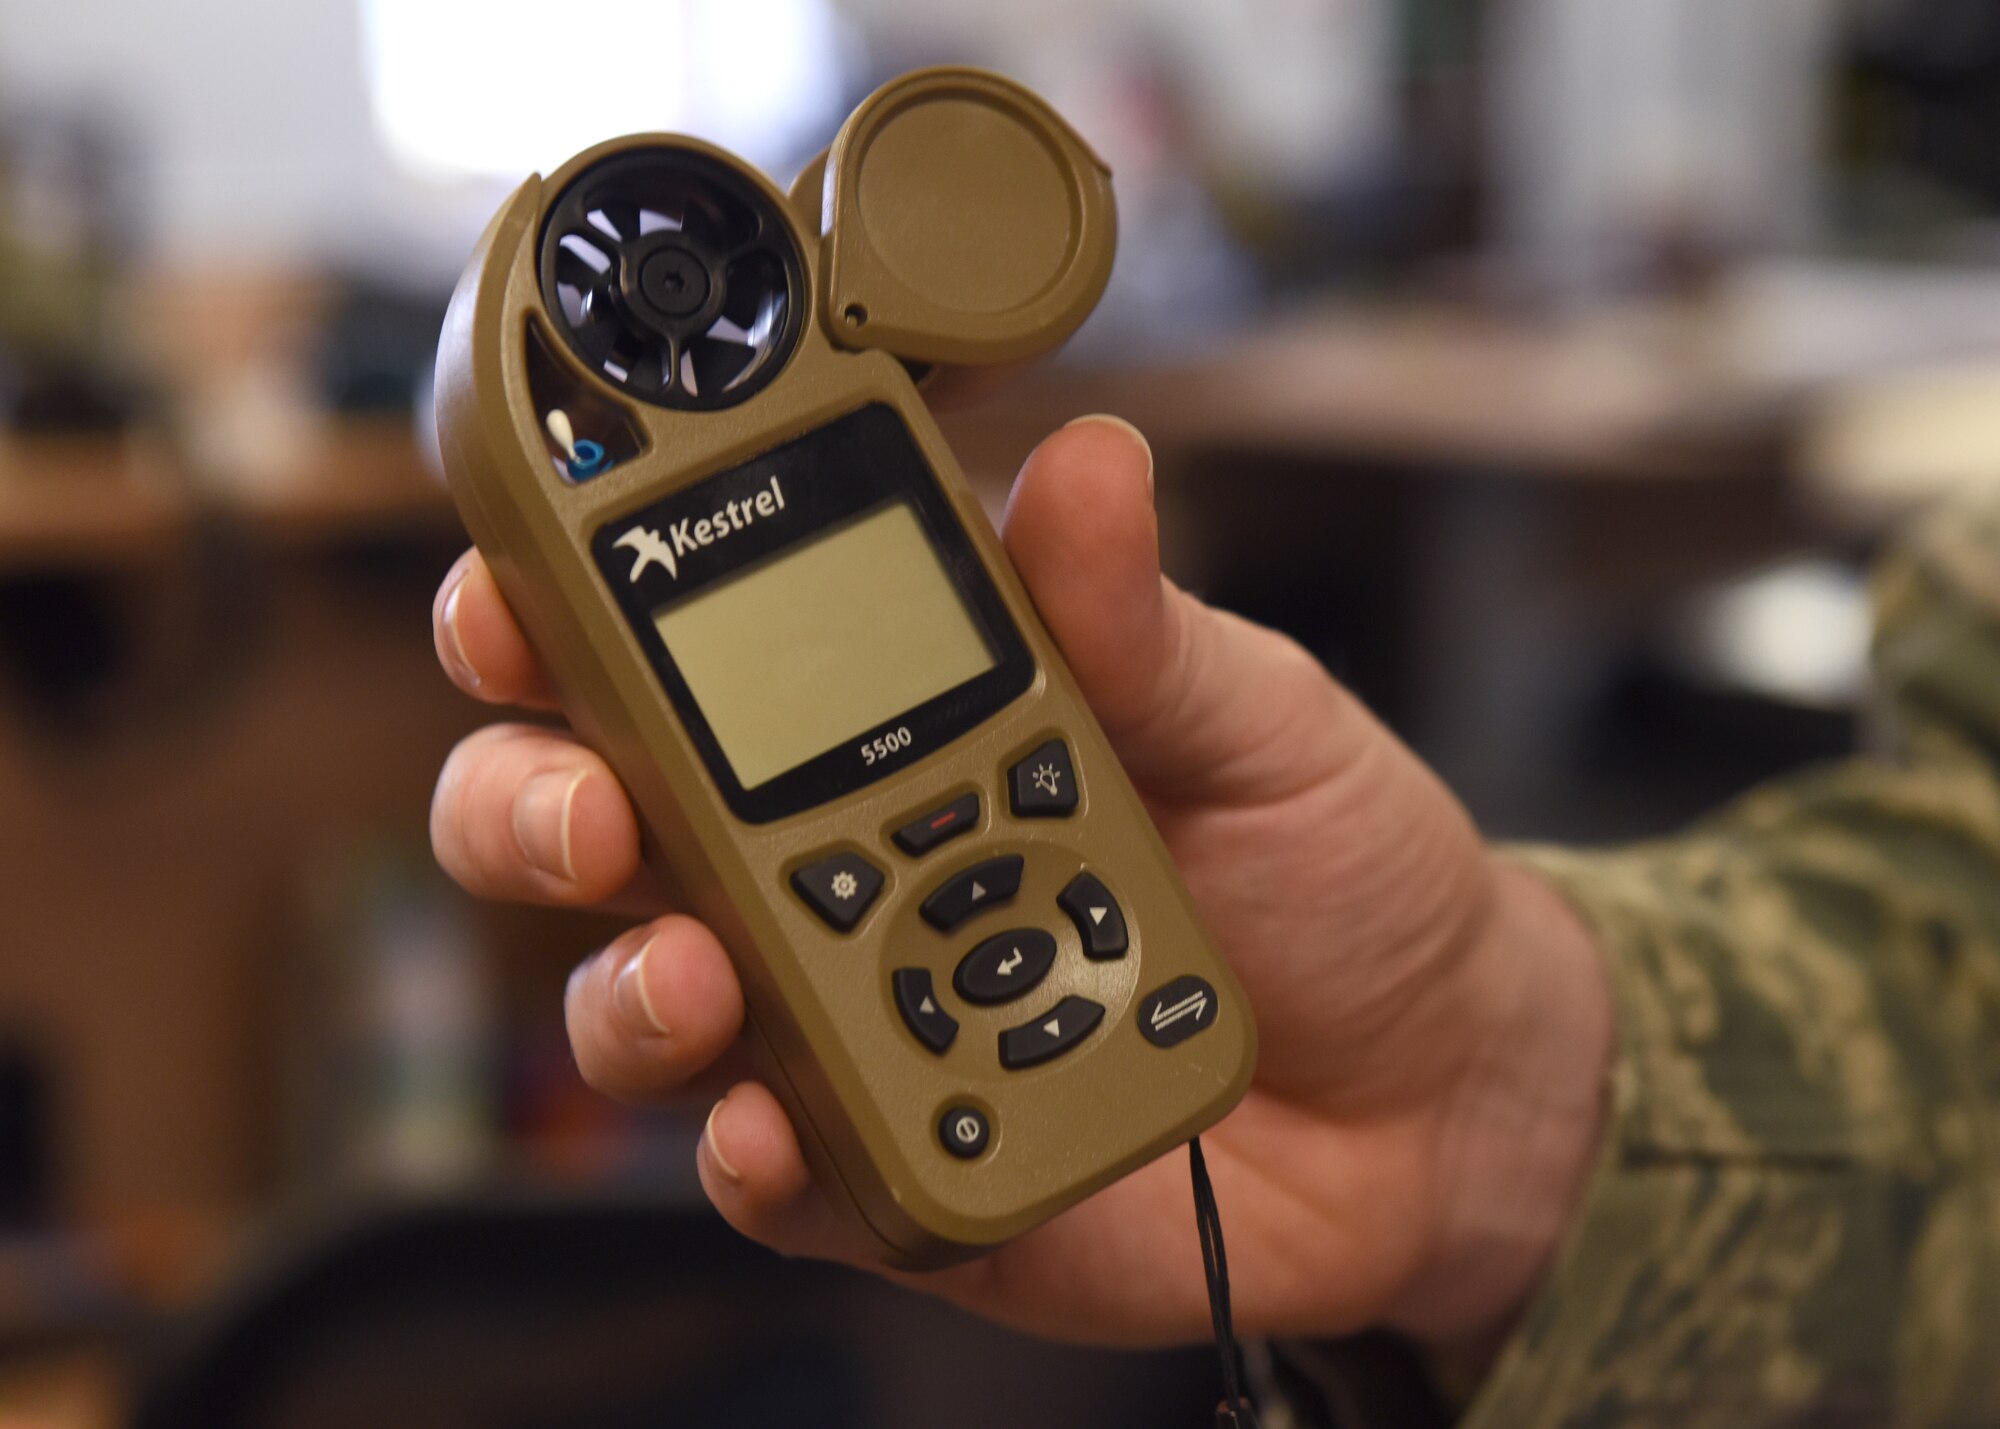 A 48th Operations Support Squadron Airman demonstrates the use of a Kestrel Weather and Wind Speed Meter at Royal Air Force Lakenheath, England, June 26, 2019. The portable meter provides meteorological data to the user. (U.S. Air Force photo by Airman 1st Class Rhonda Smith)